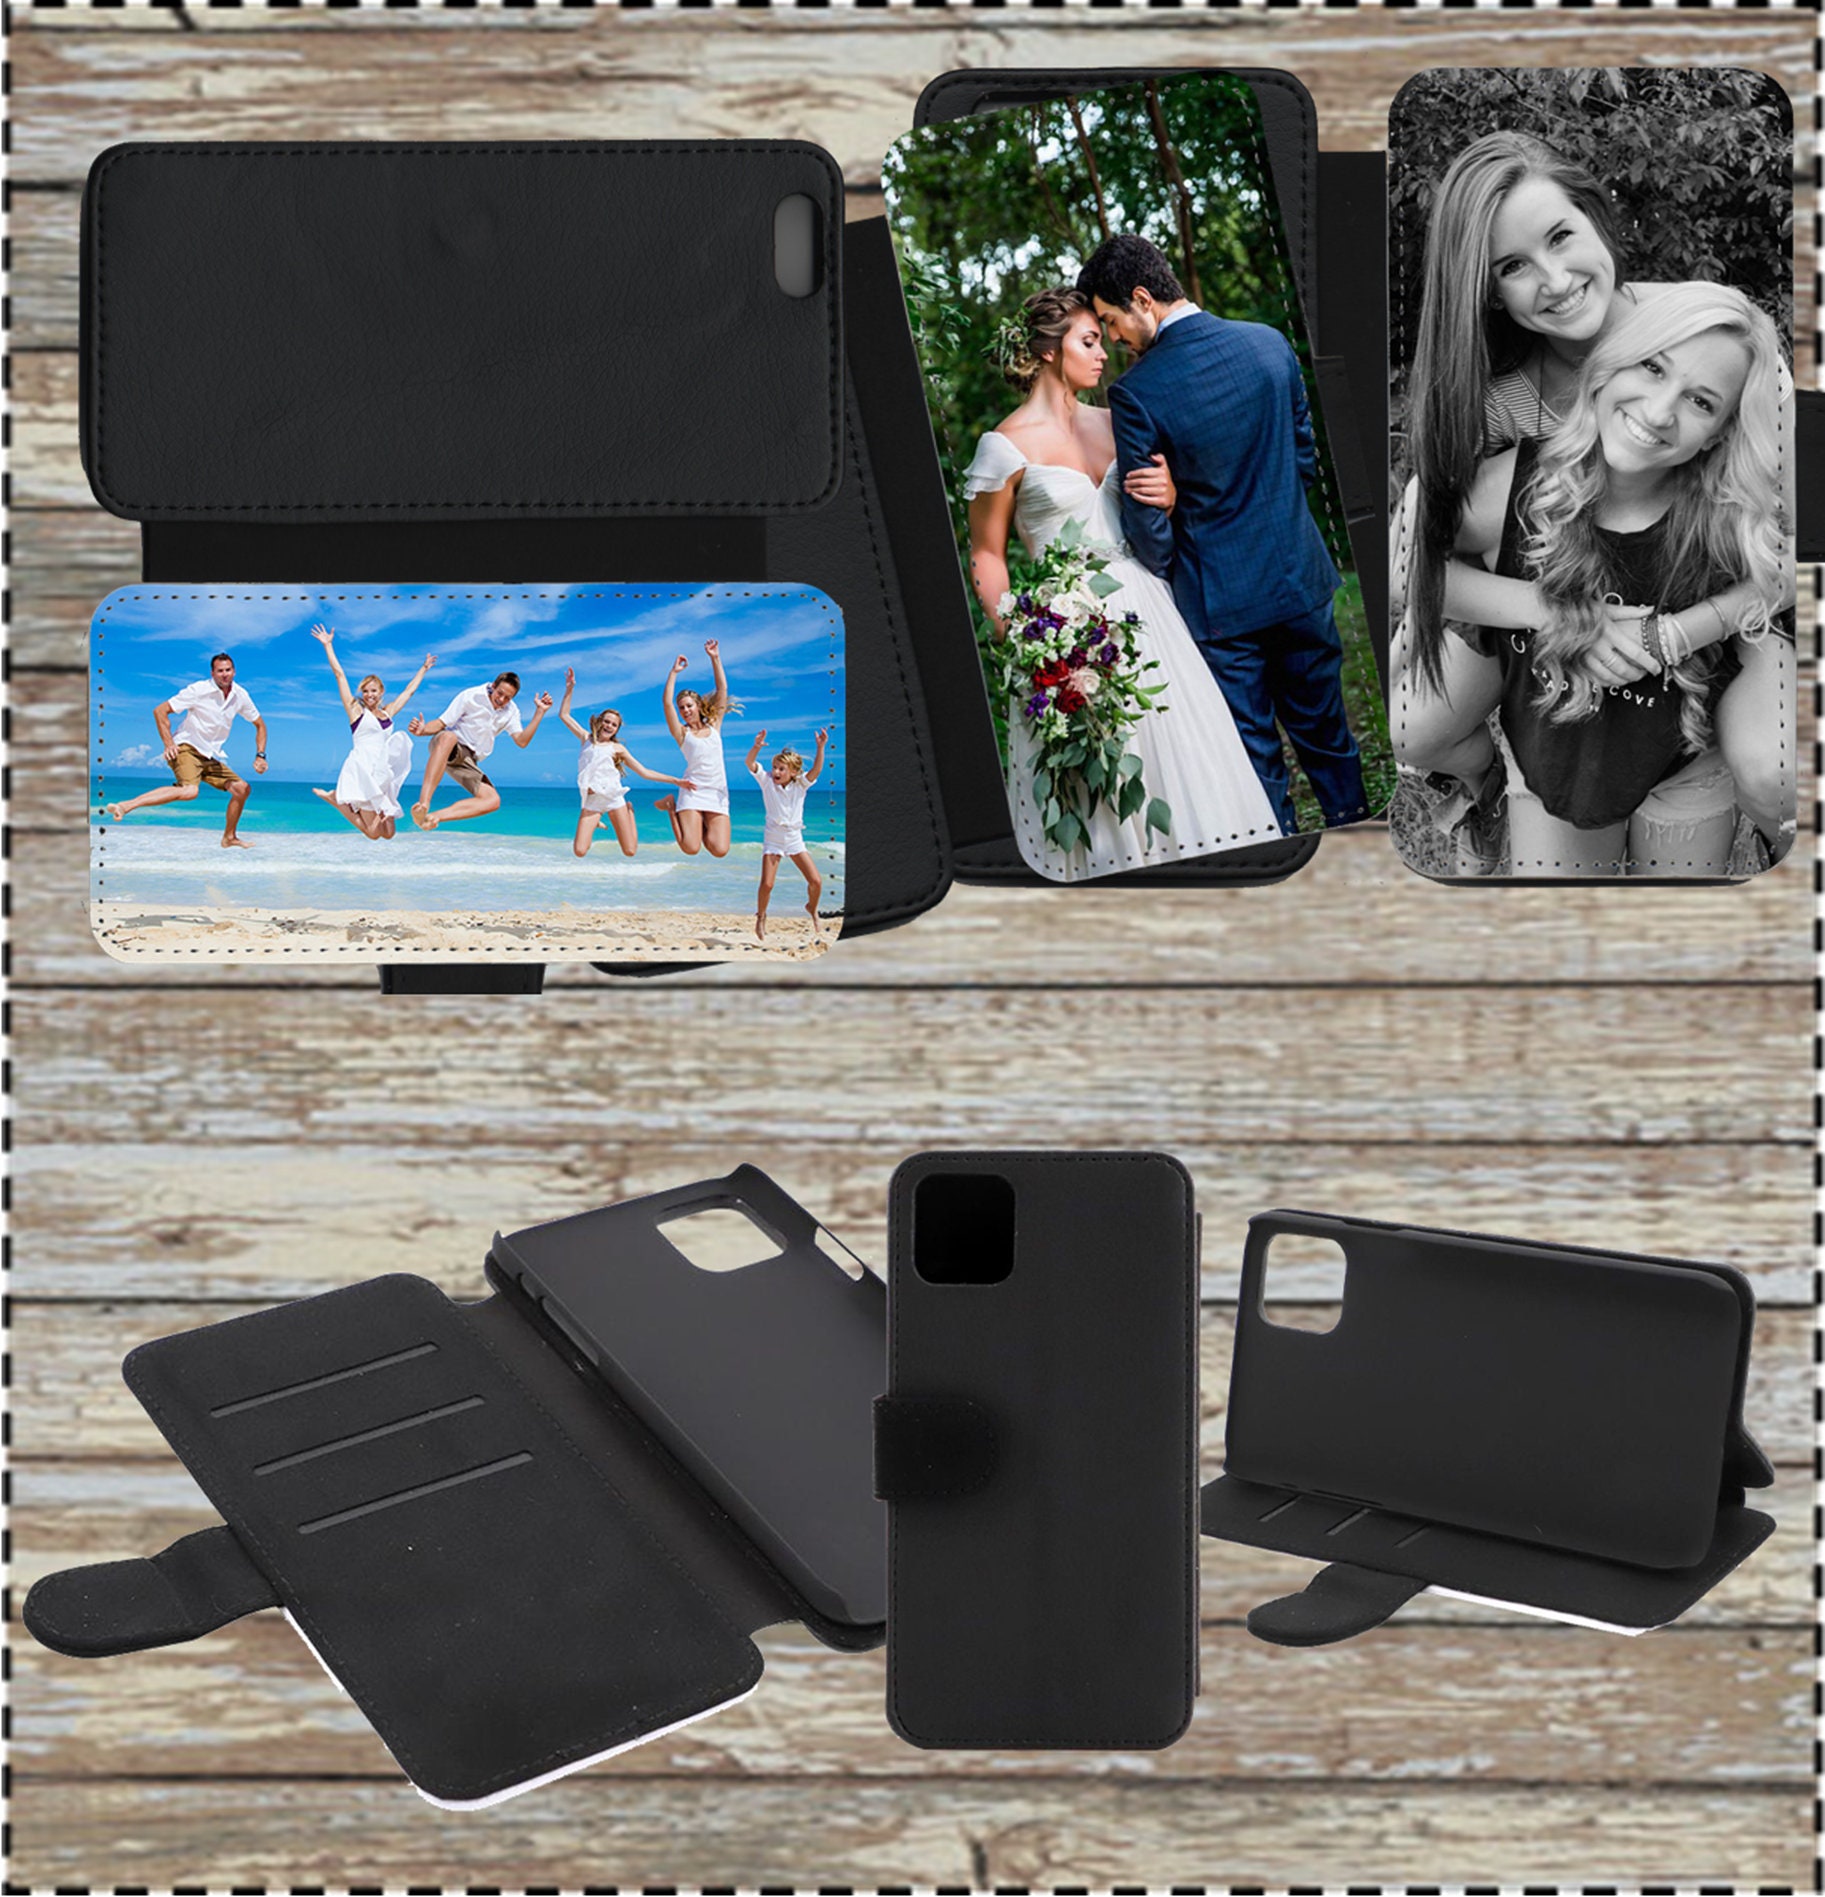 PESRONALISED Leather Flip CUSTOM PHOTO PICTURE PHONE CASE COVER for iPhone 6  6s 